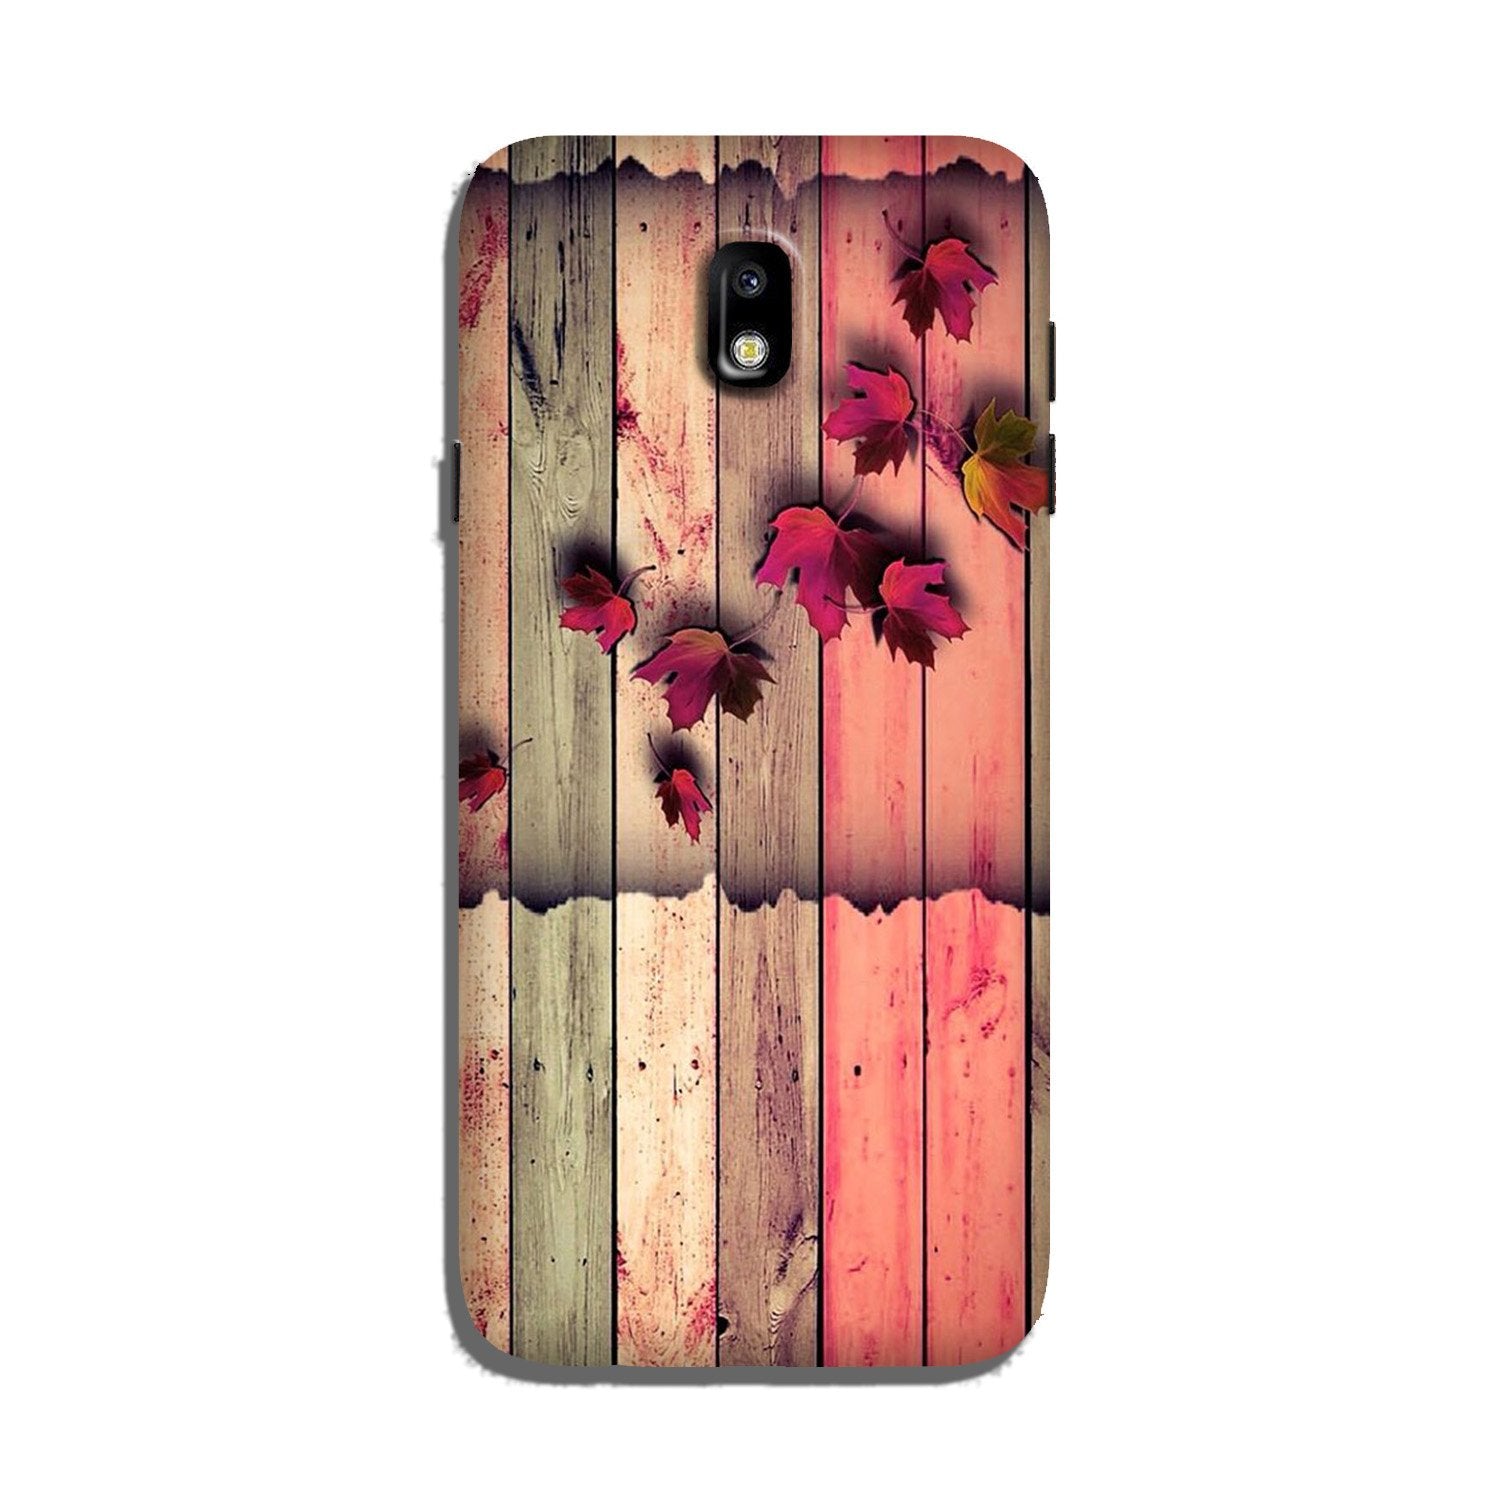 Wooden look2 Case for Galaxy J3 Pro